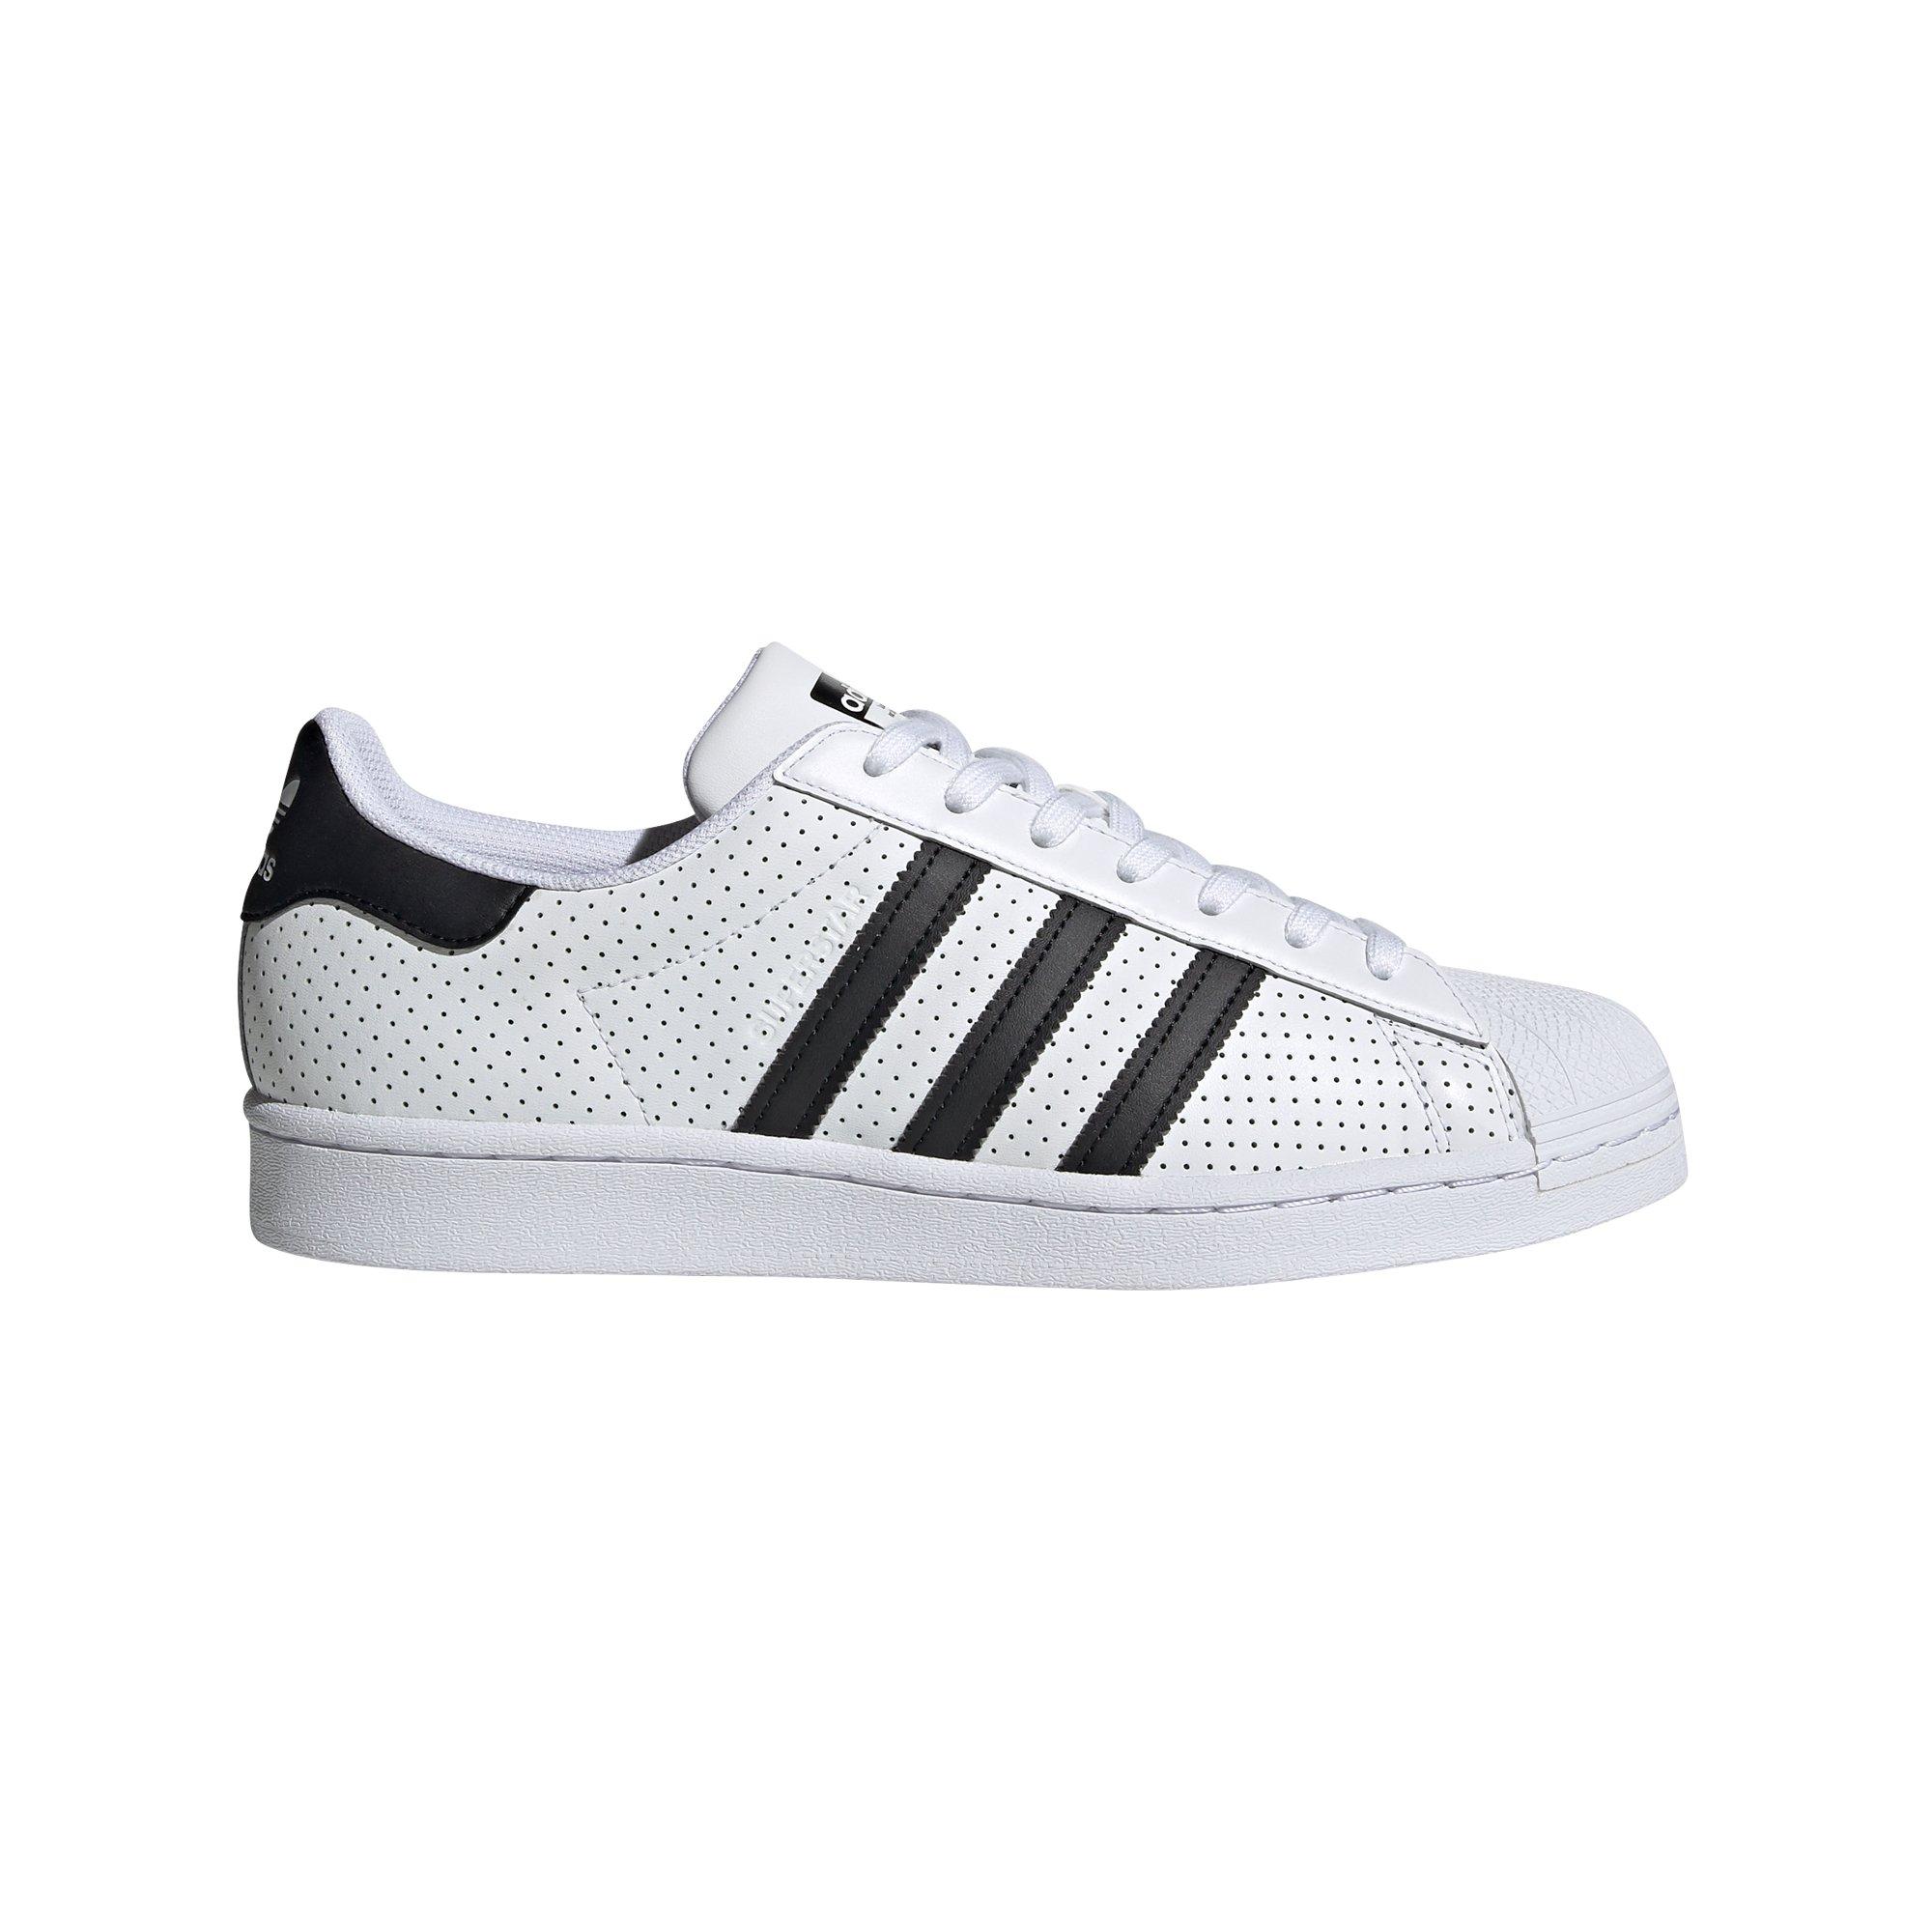 how to whiten adidas superstar shoes